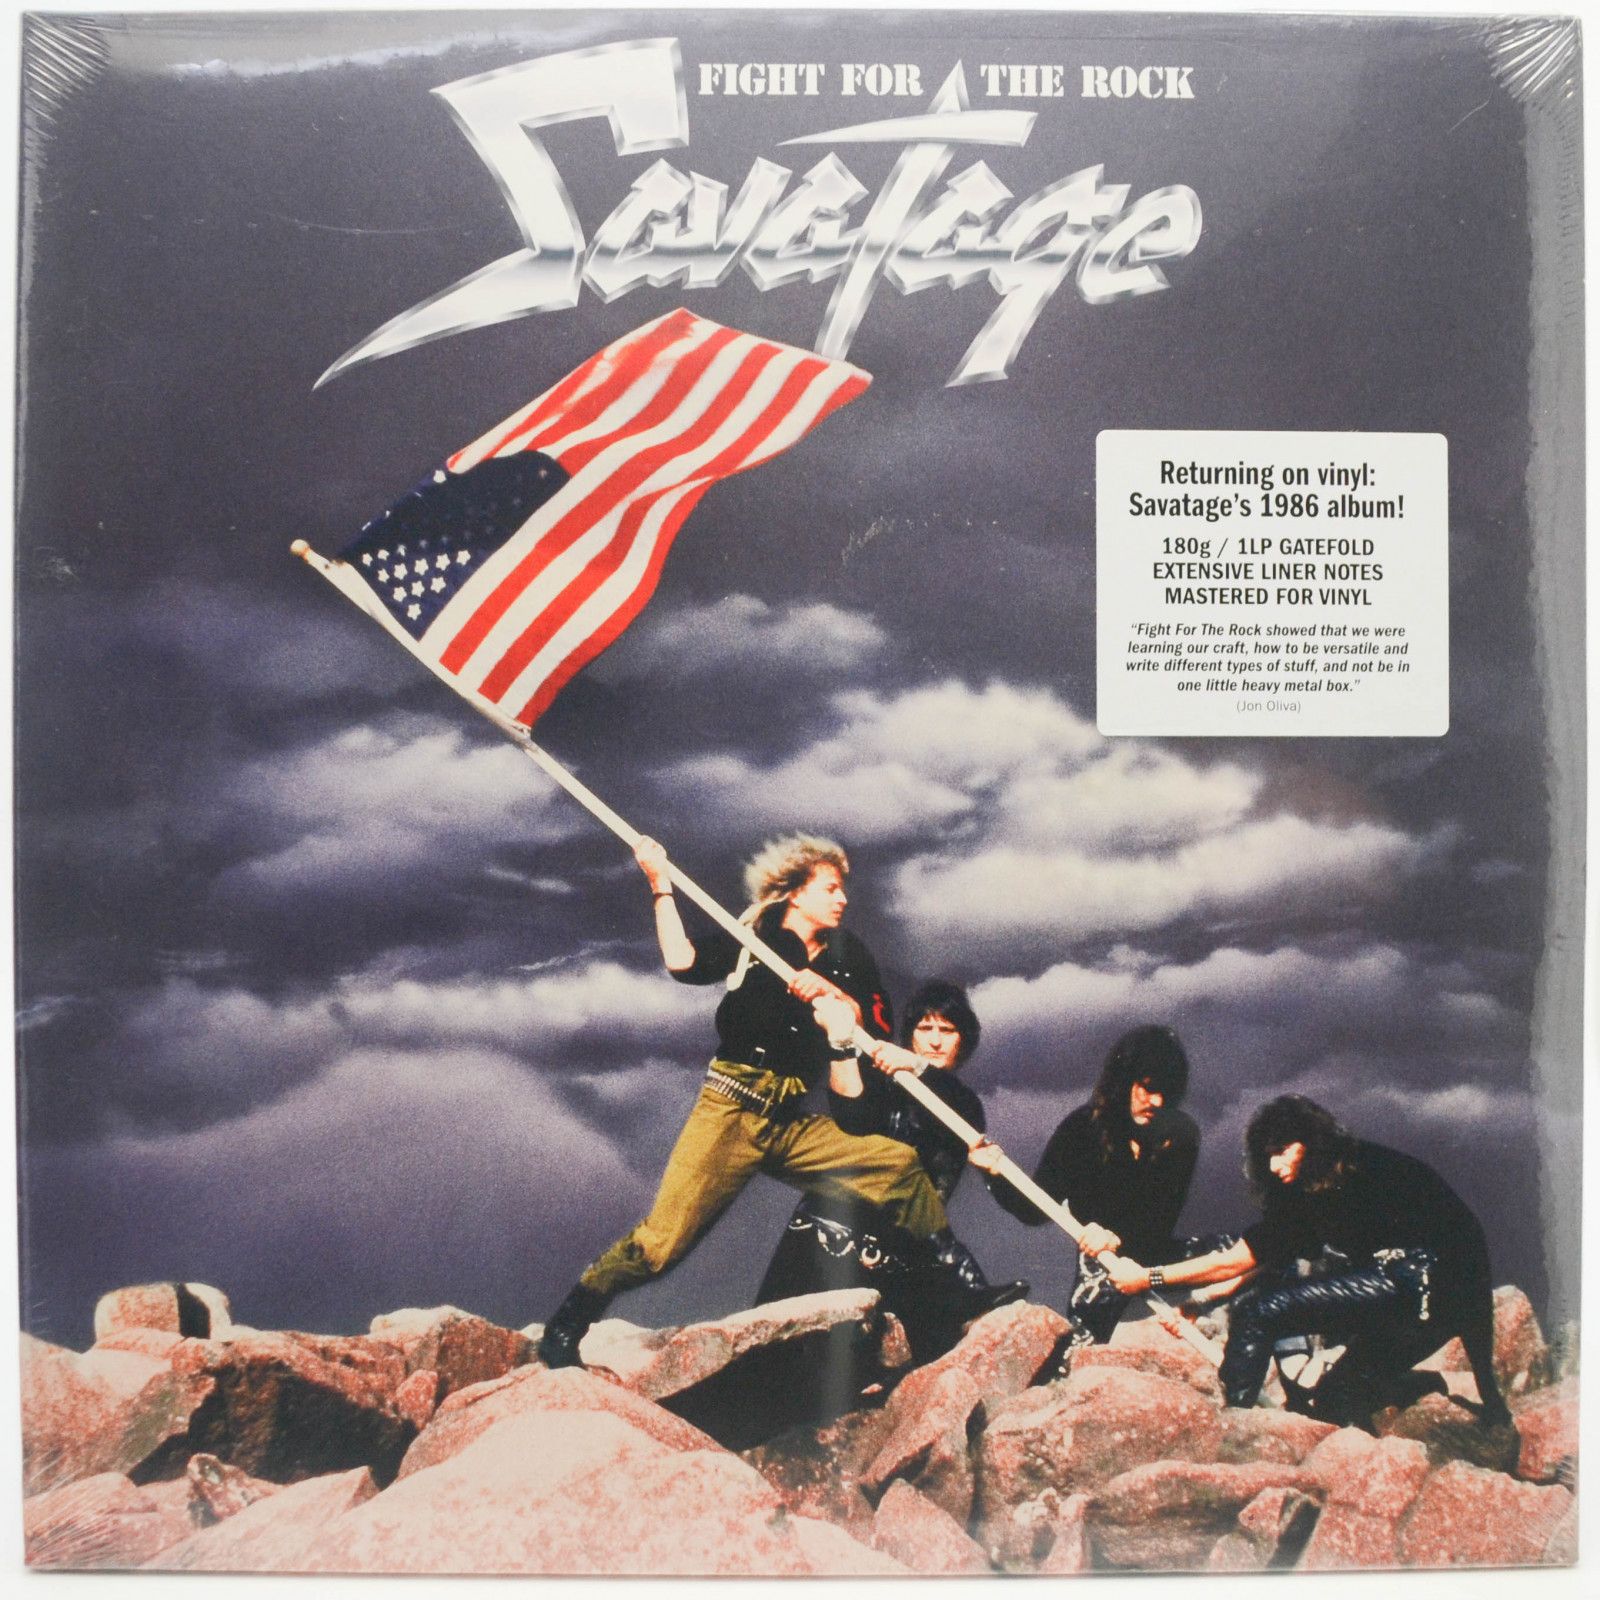 Savatage — Fight For The Rock, 1986